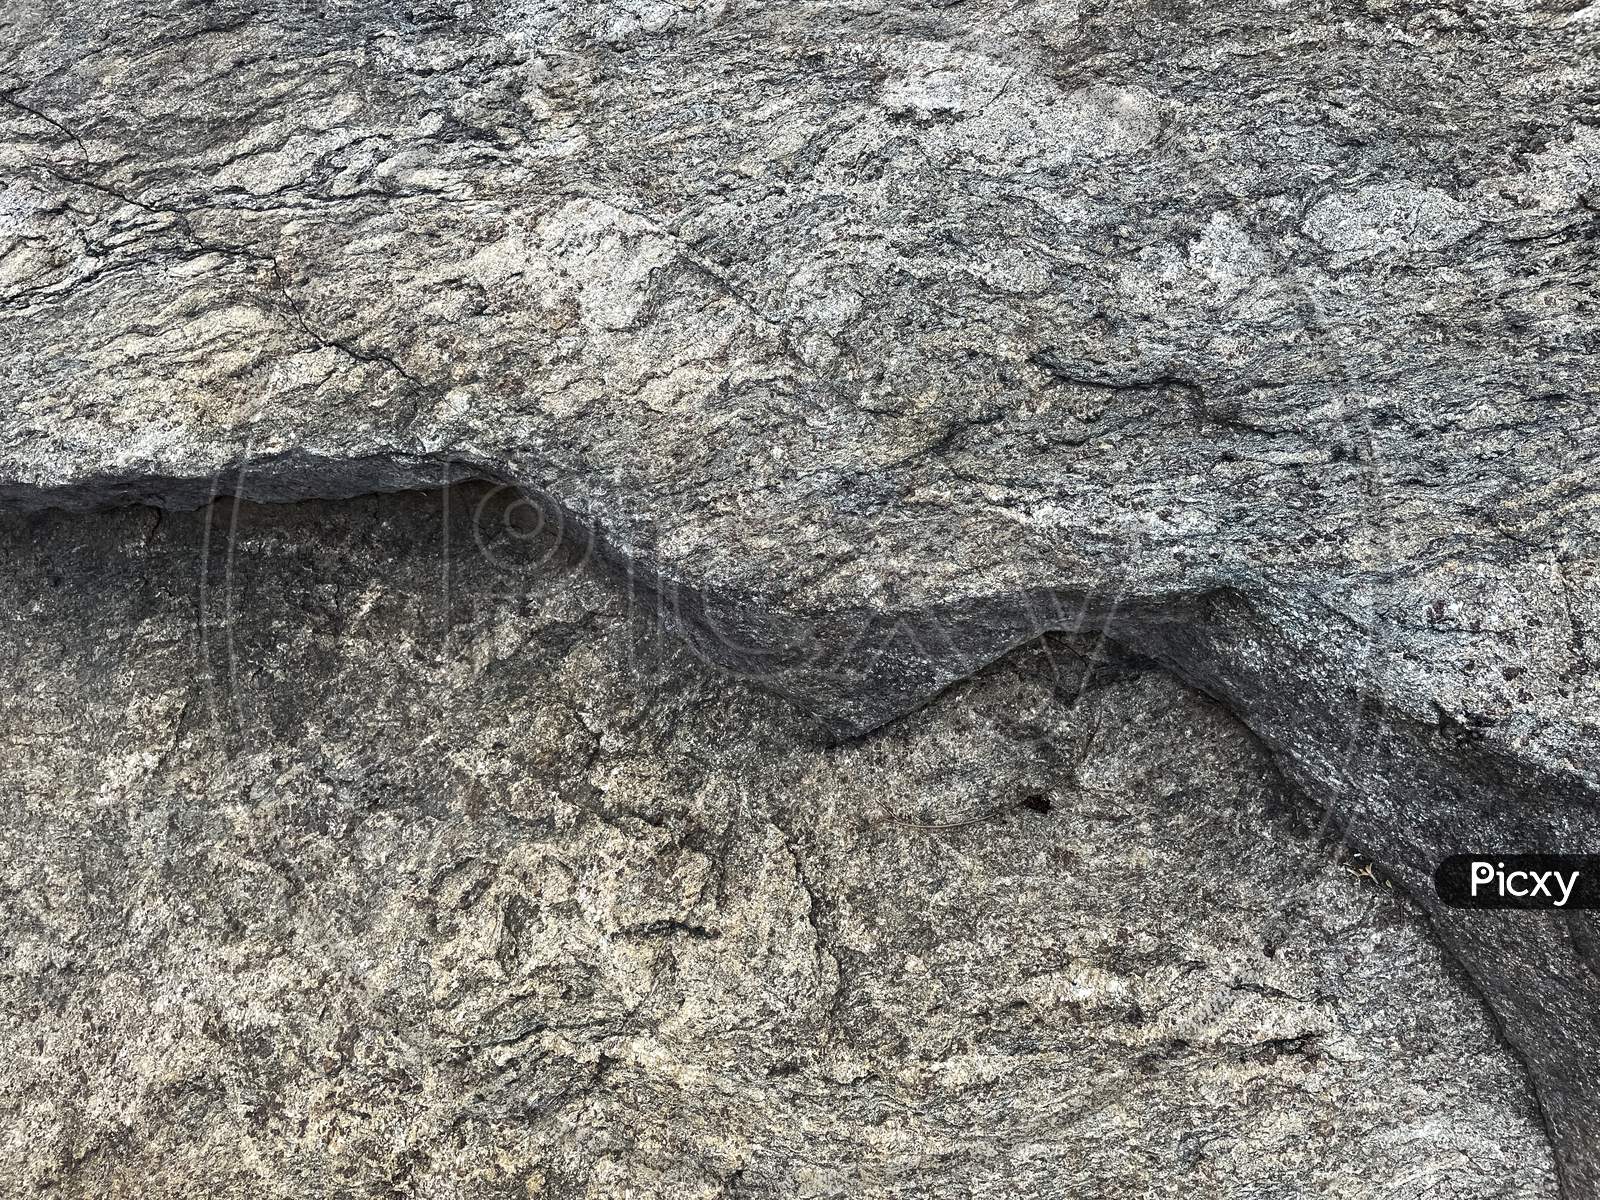 Image Of Cracked Surface Texture Of Stone.